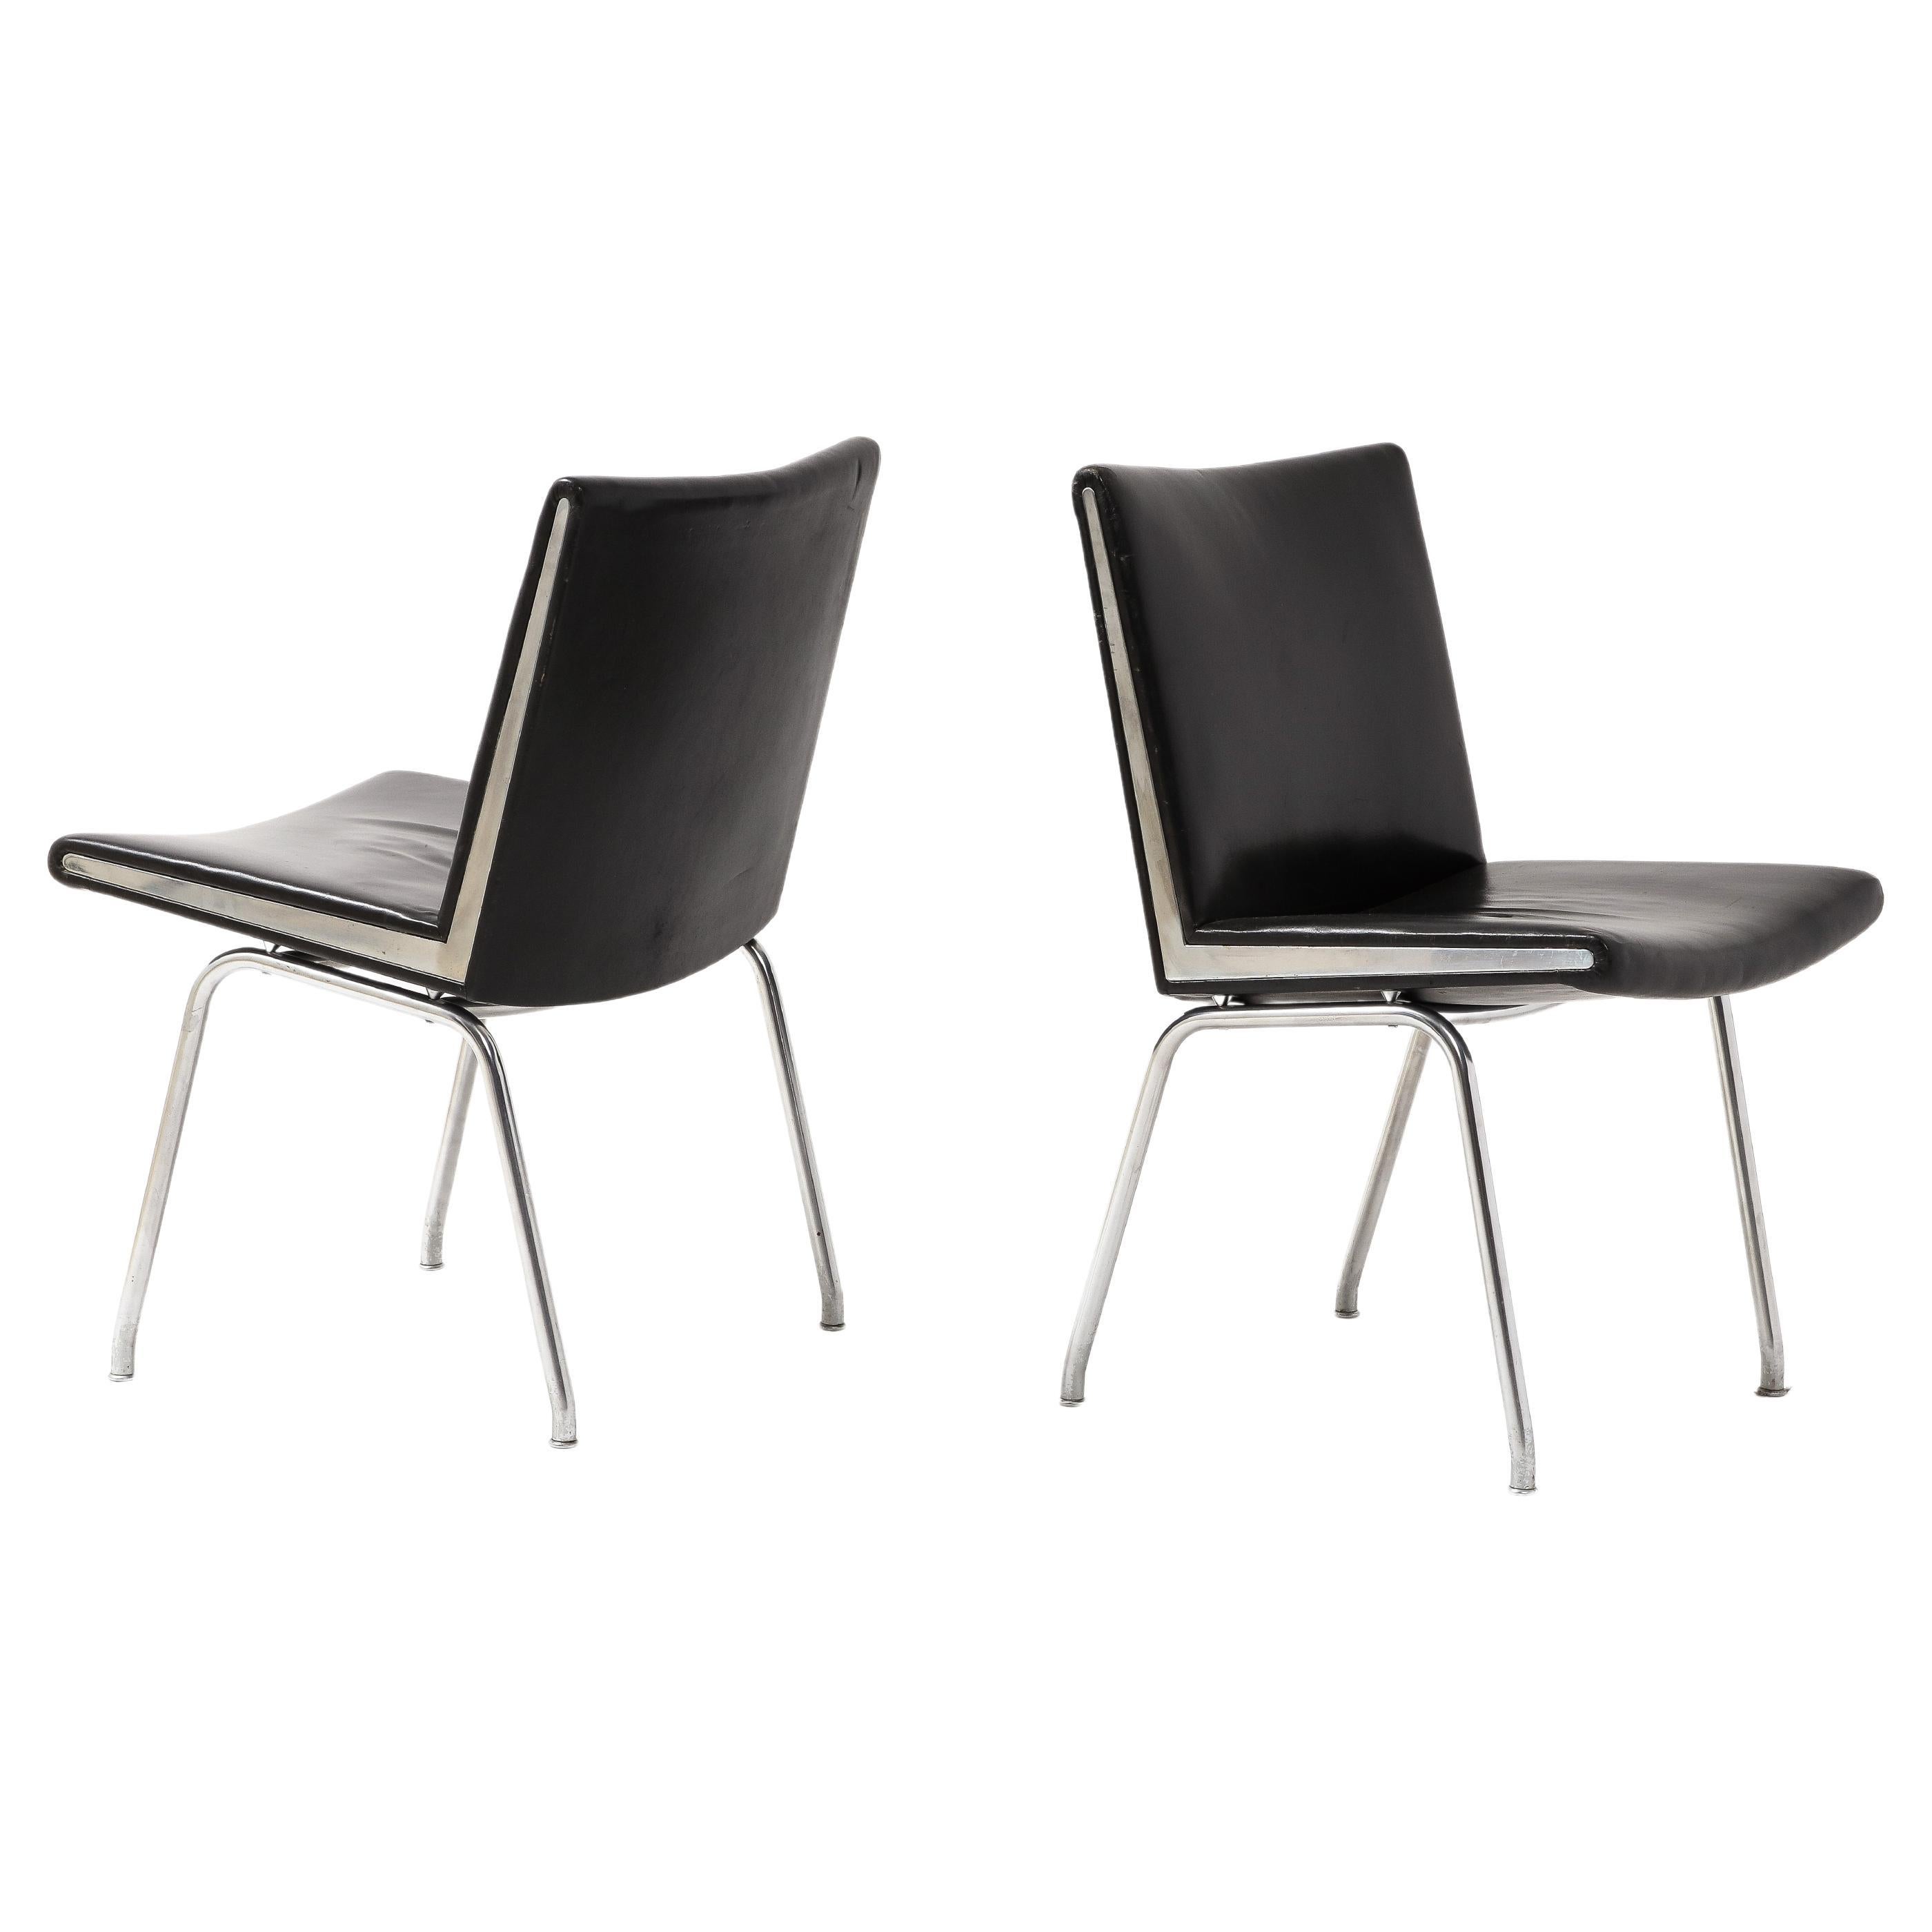 Pair of Chrome & Leather "Airport" Visitor Chairs by Wegner, Denmark, 1960's For Sale